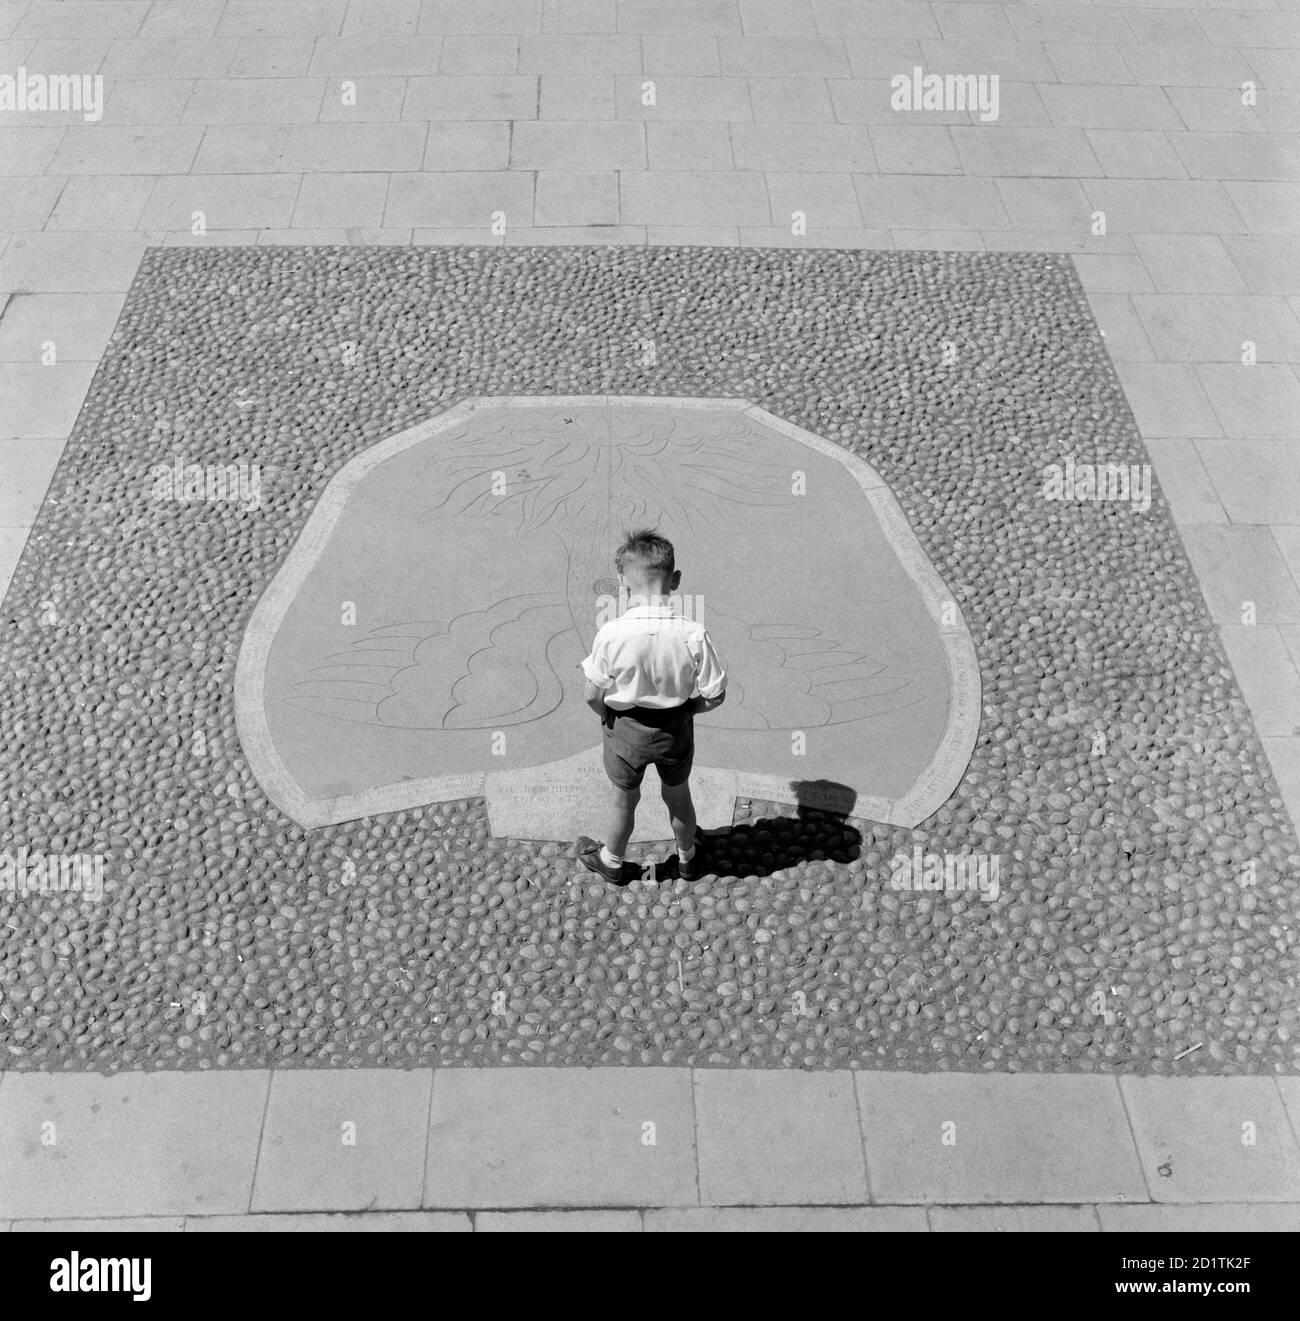 LEVELLING STONE, Coventry, West Midlands. A small boy looking at the phoenix motif on the Levelling Stone which was unveiled on 8th June 1946 marking the start of rebuilding the centre of the war-damaged area of Coventry. Photographed by Eric de Mare between 1960 and 1969. Stock Photo